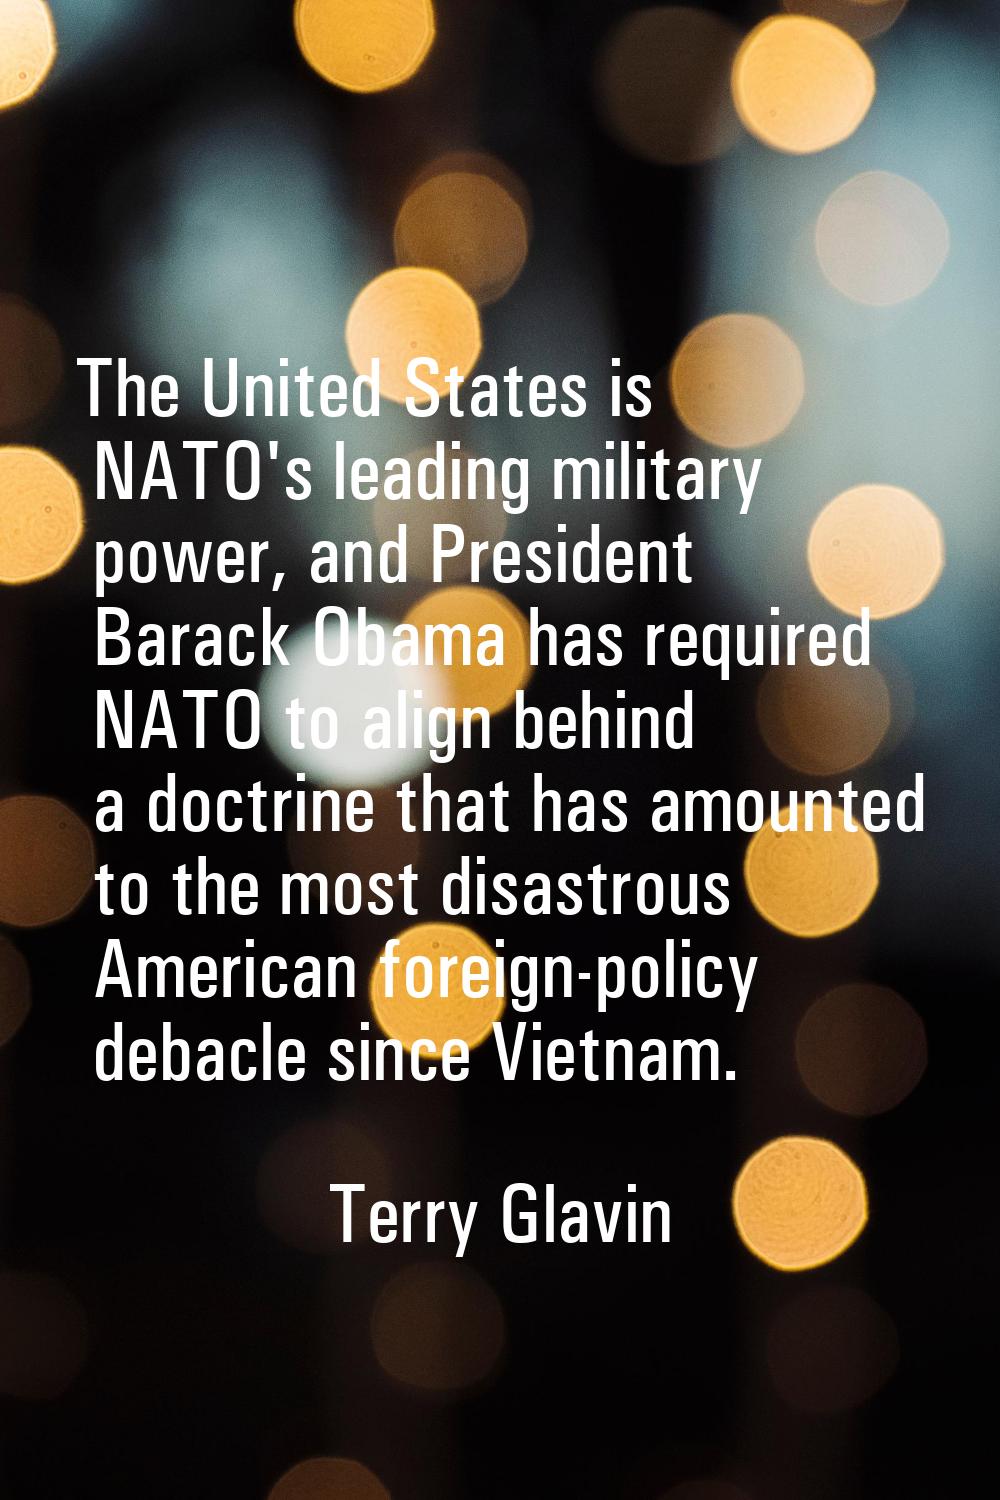 The United States is NATO's leading military power, and President Barack Obama has required NATO to